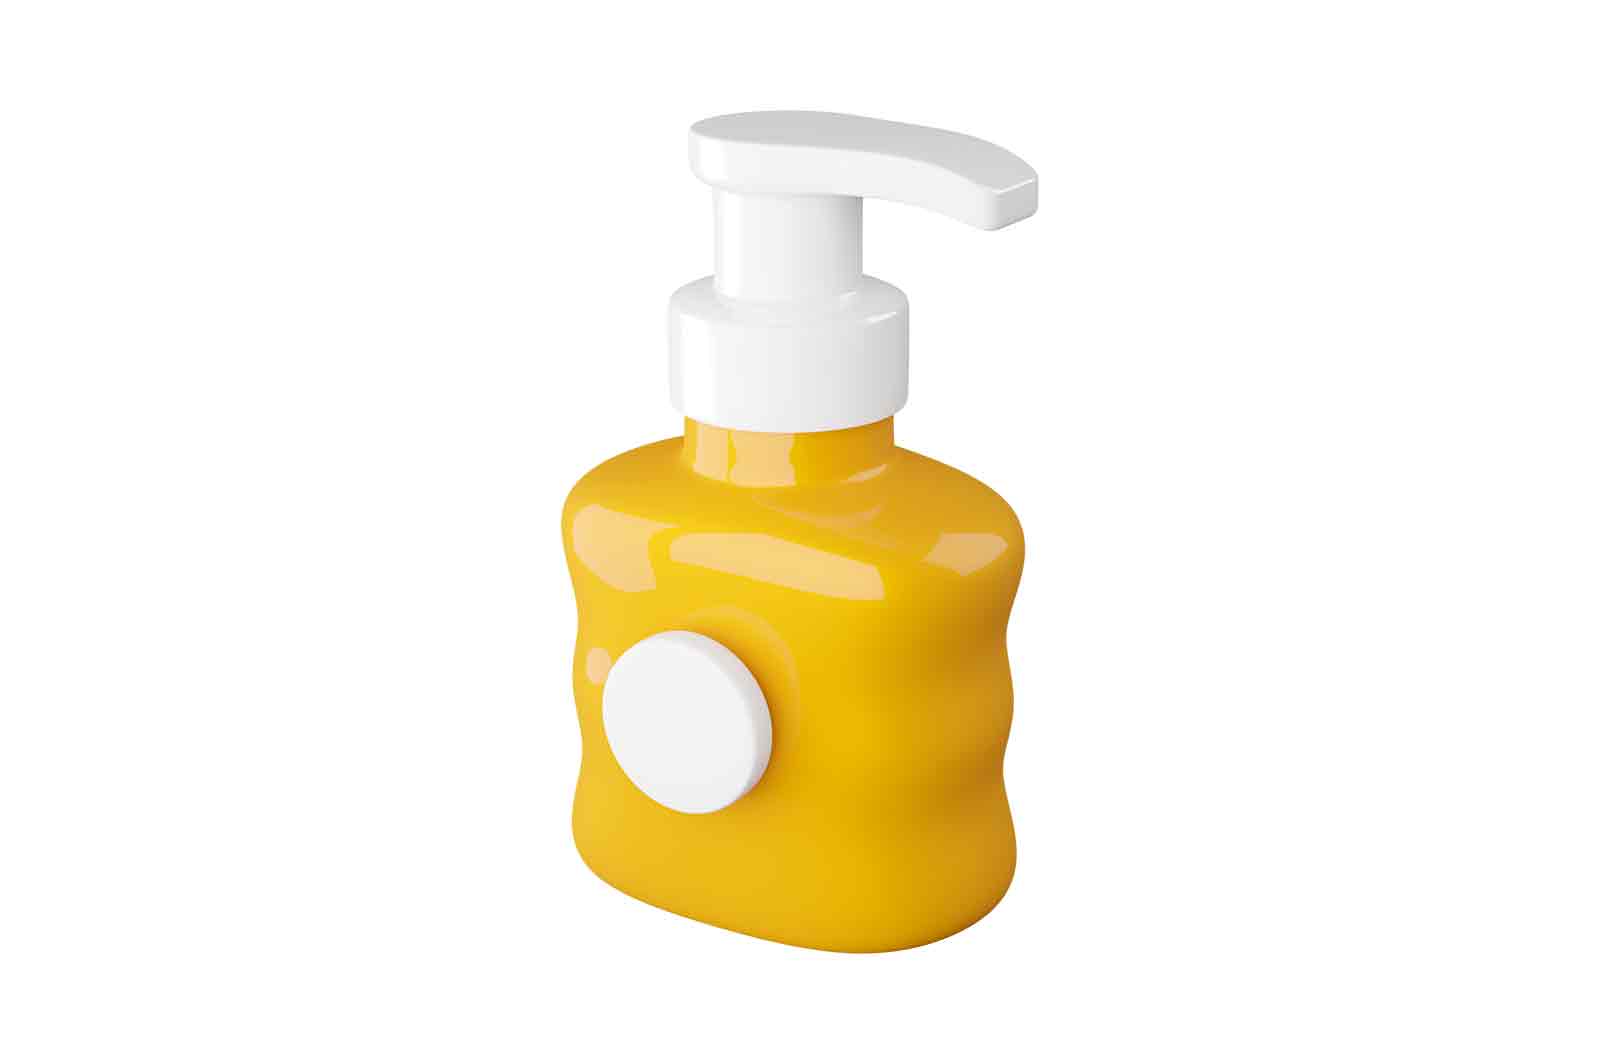 Bottle with dispenser, sun protection lotions 3d rendered icon illustration. Sunscreen and sunblock cream. Sunbath concept